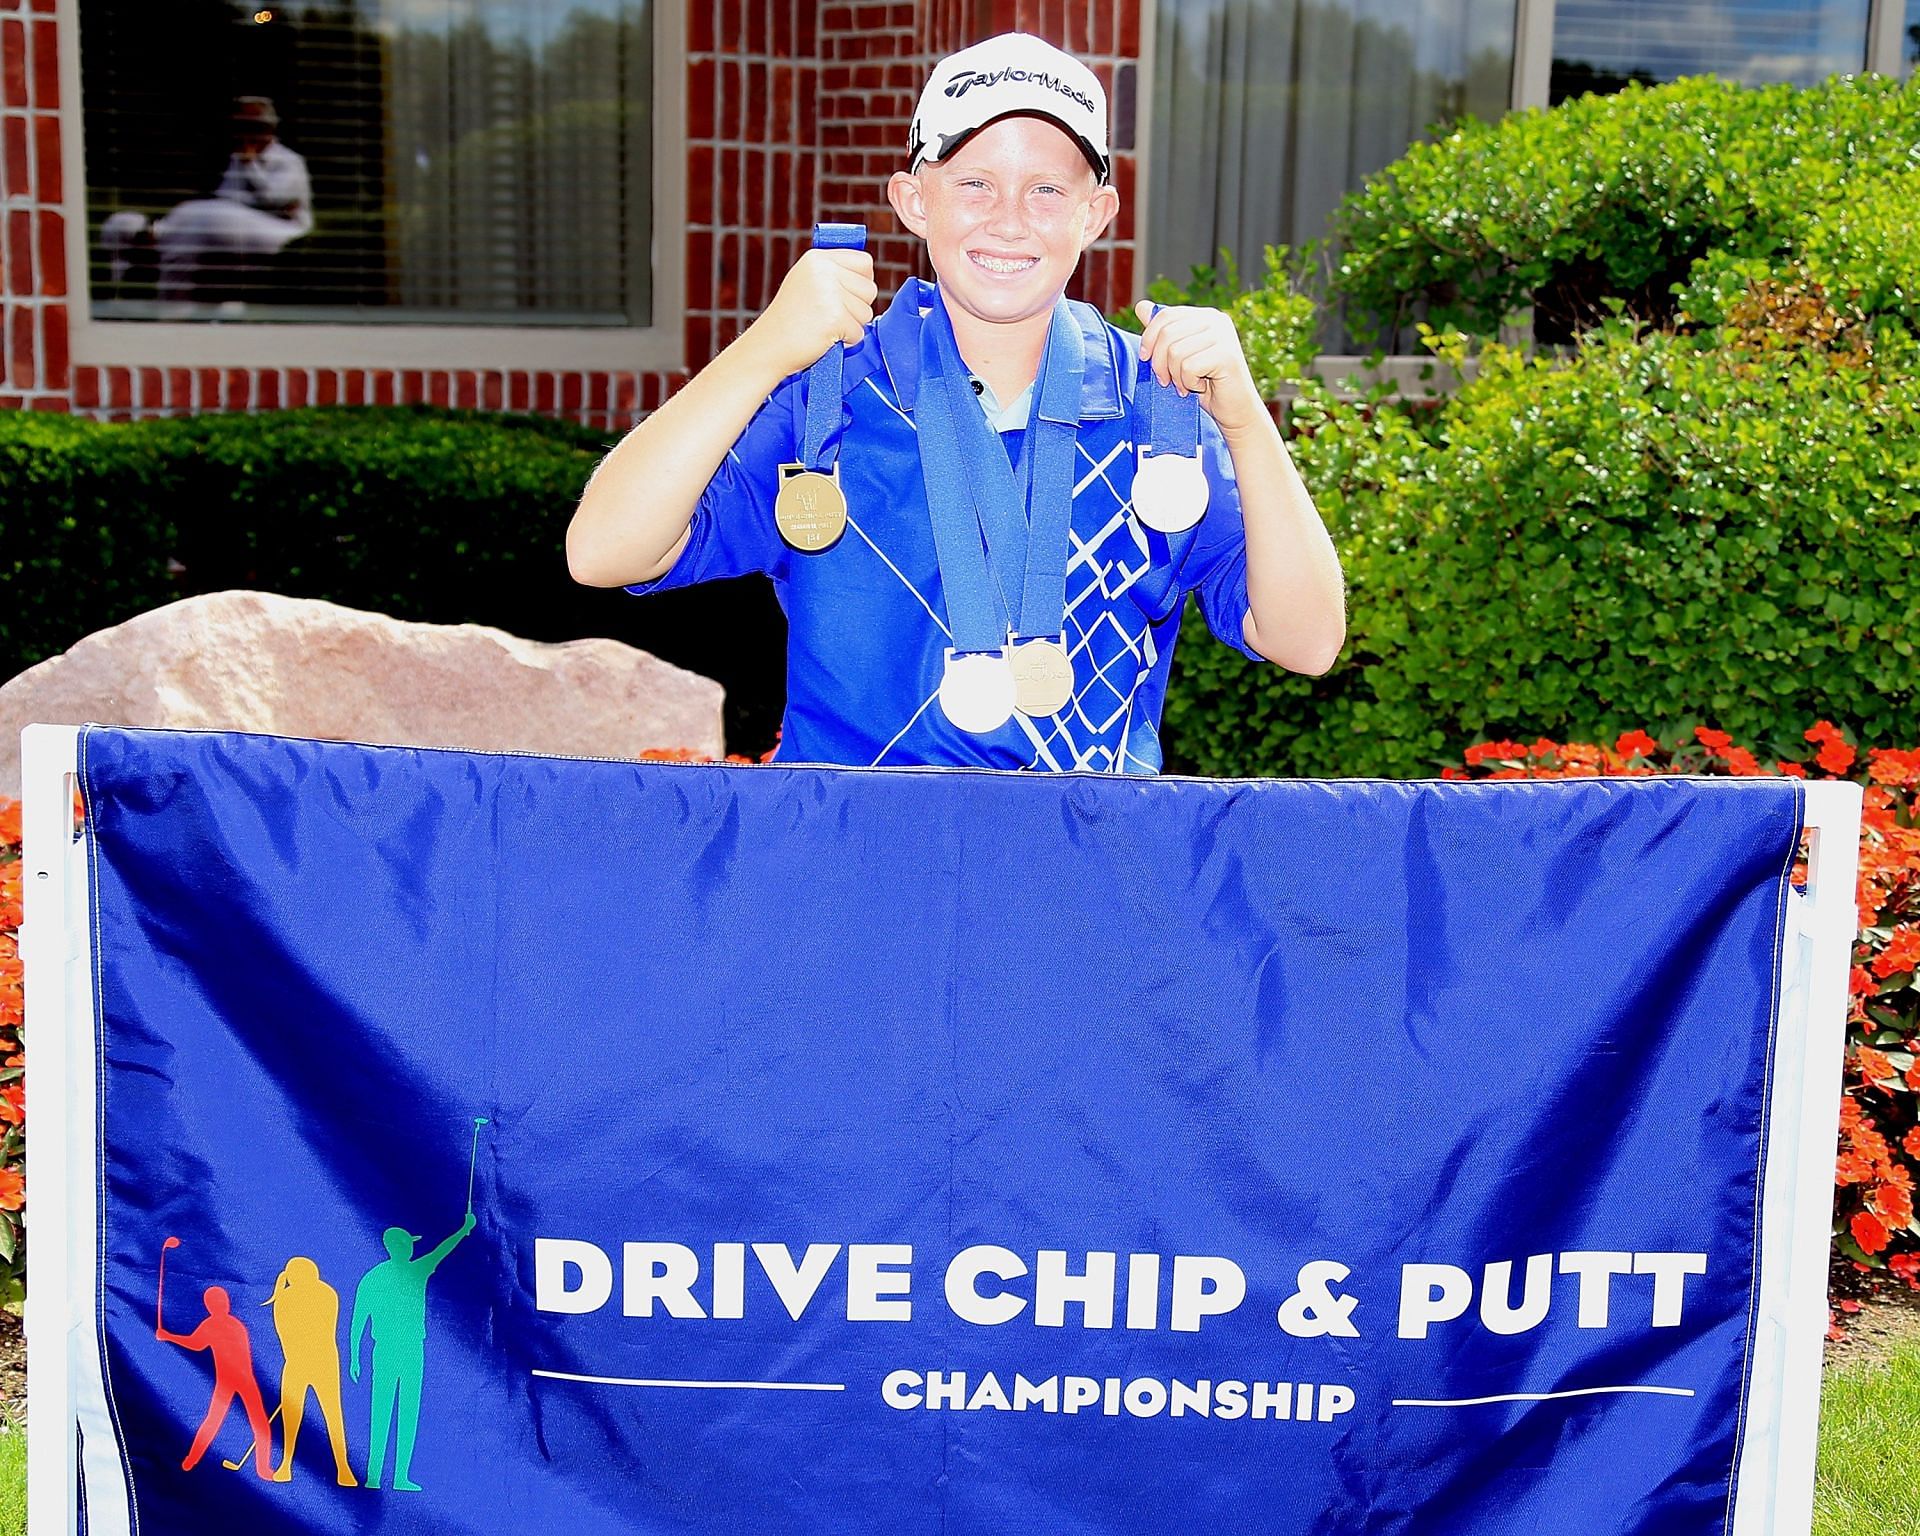 A 12-years-old Maxwell Moldovan won all three events at The Drive, Chip and Putt Championship, 2014 (Image via Getty).